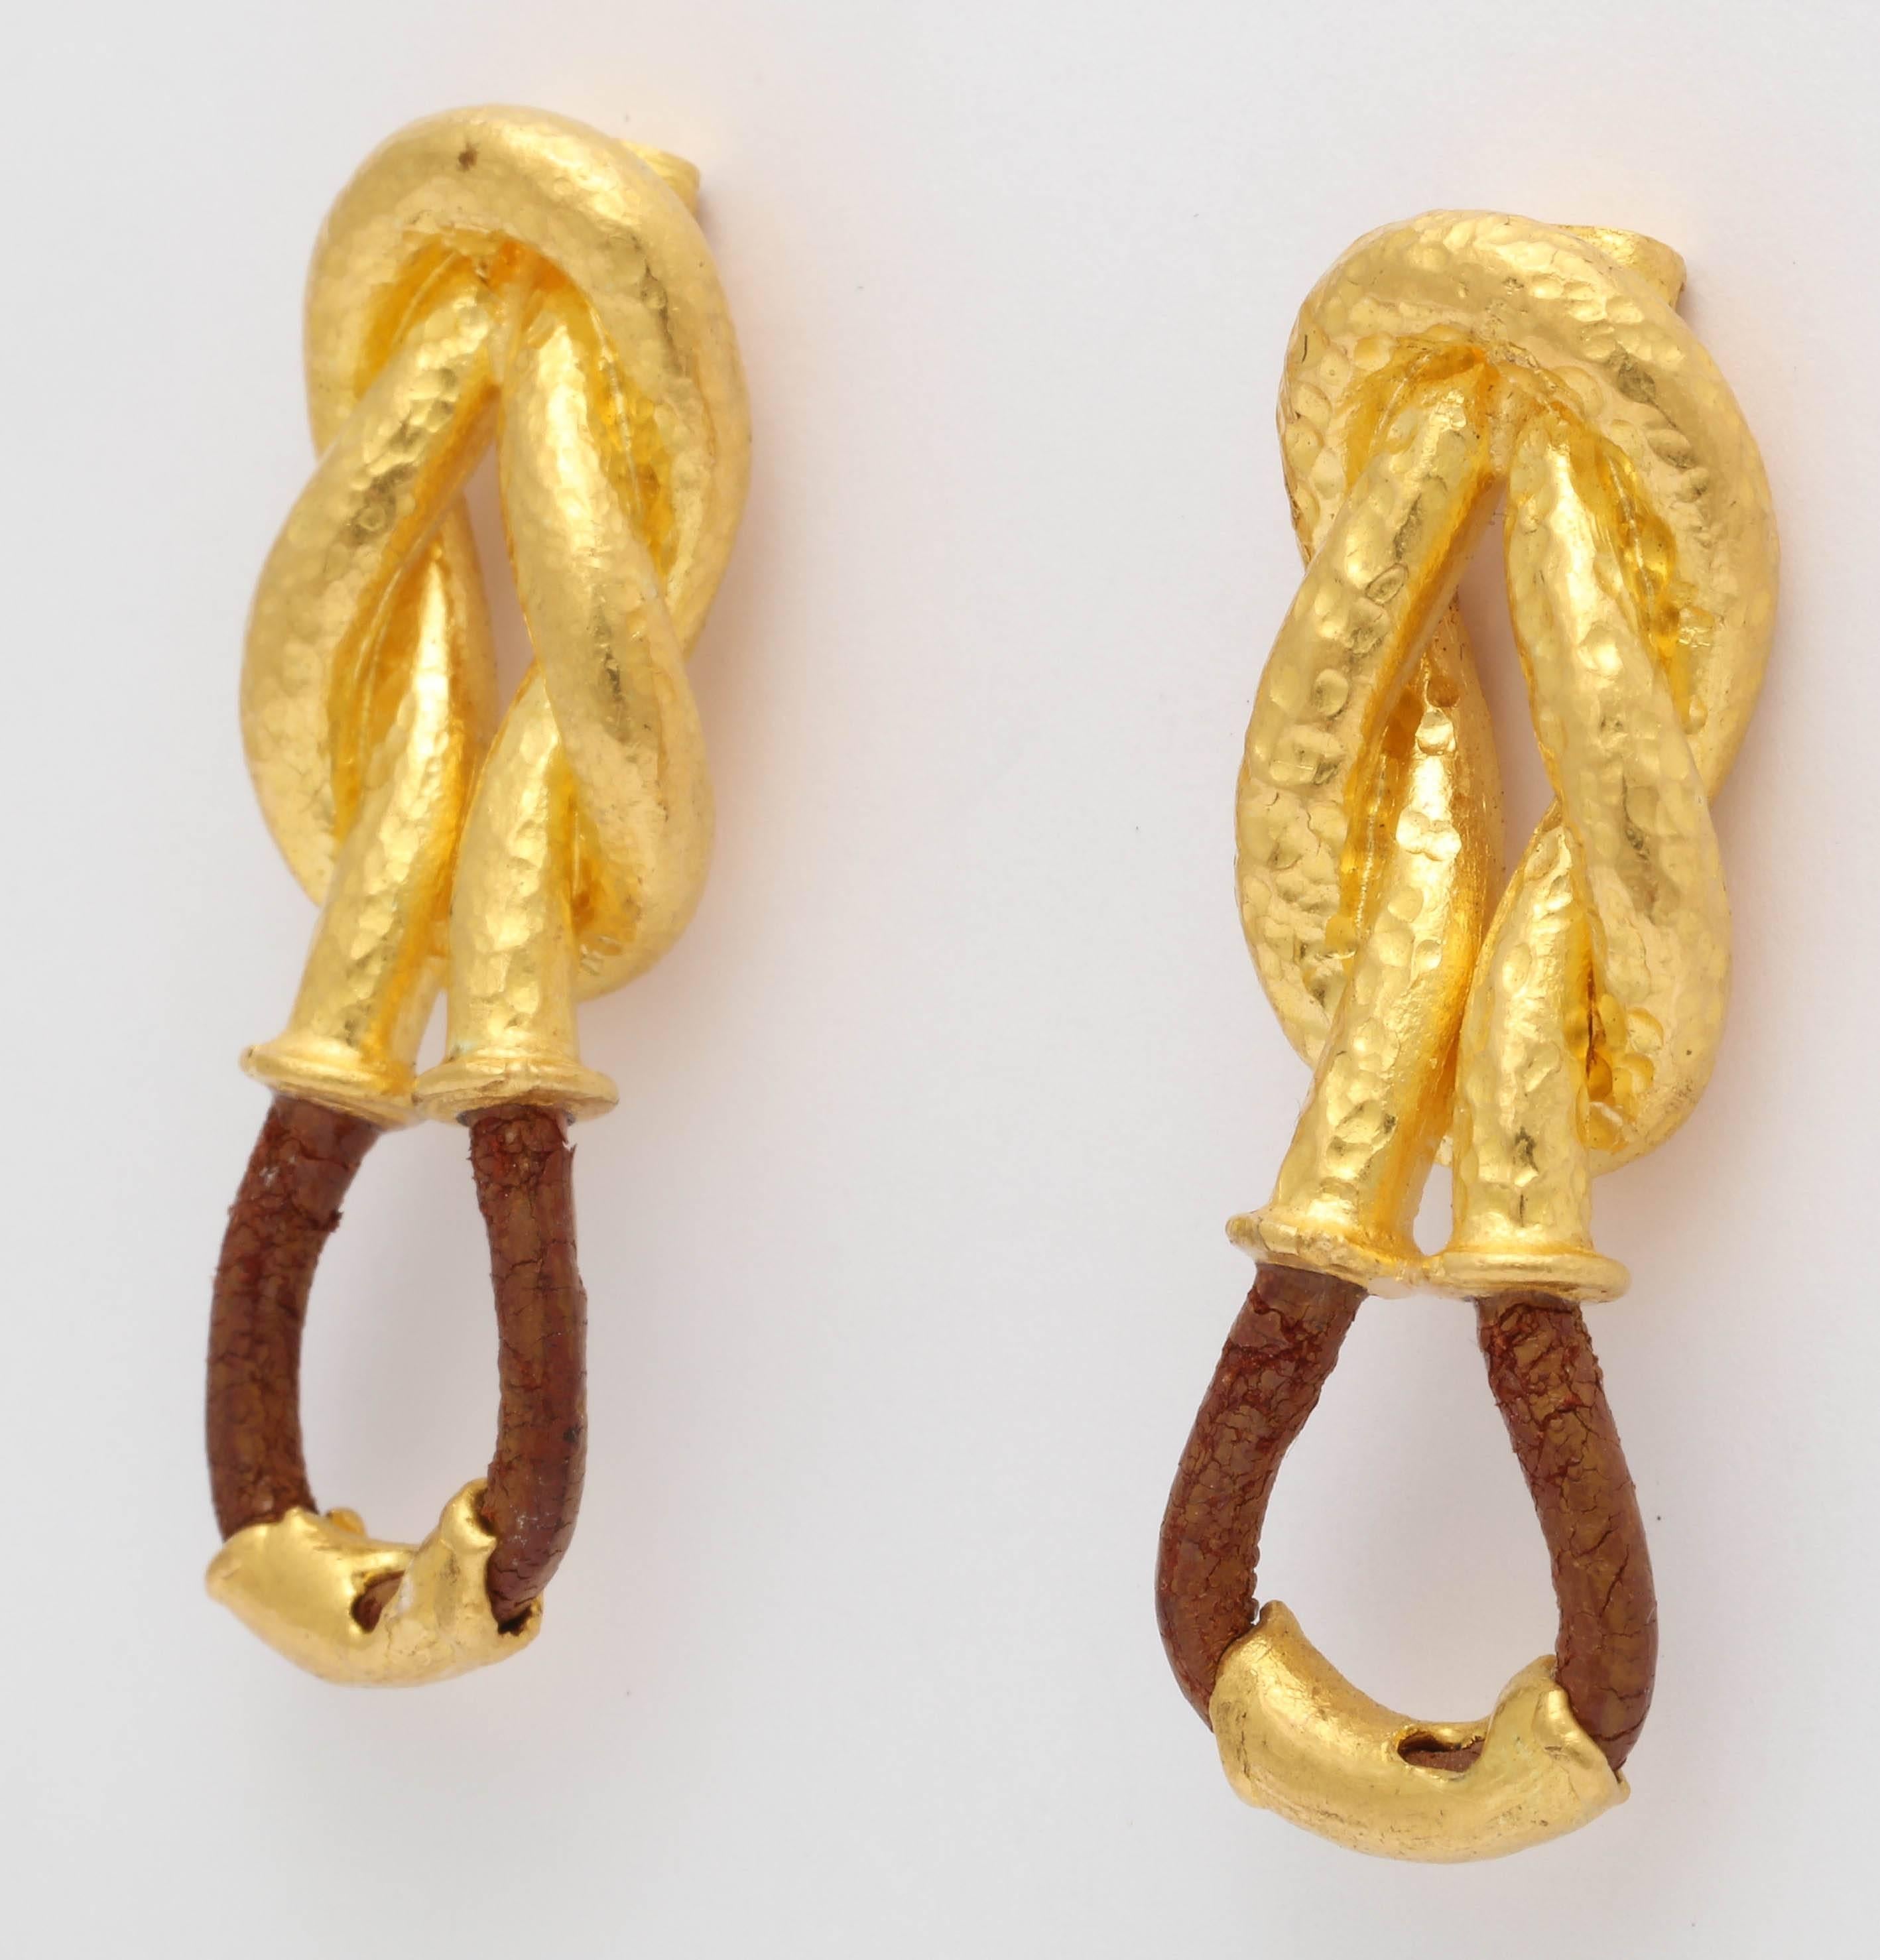 These earrings are 22 kt very yellow gold. Abstract and  modern, the design is one of a kind. For those who appreciate exotic and unique styles.